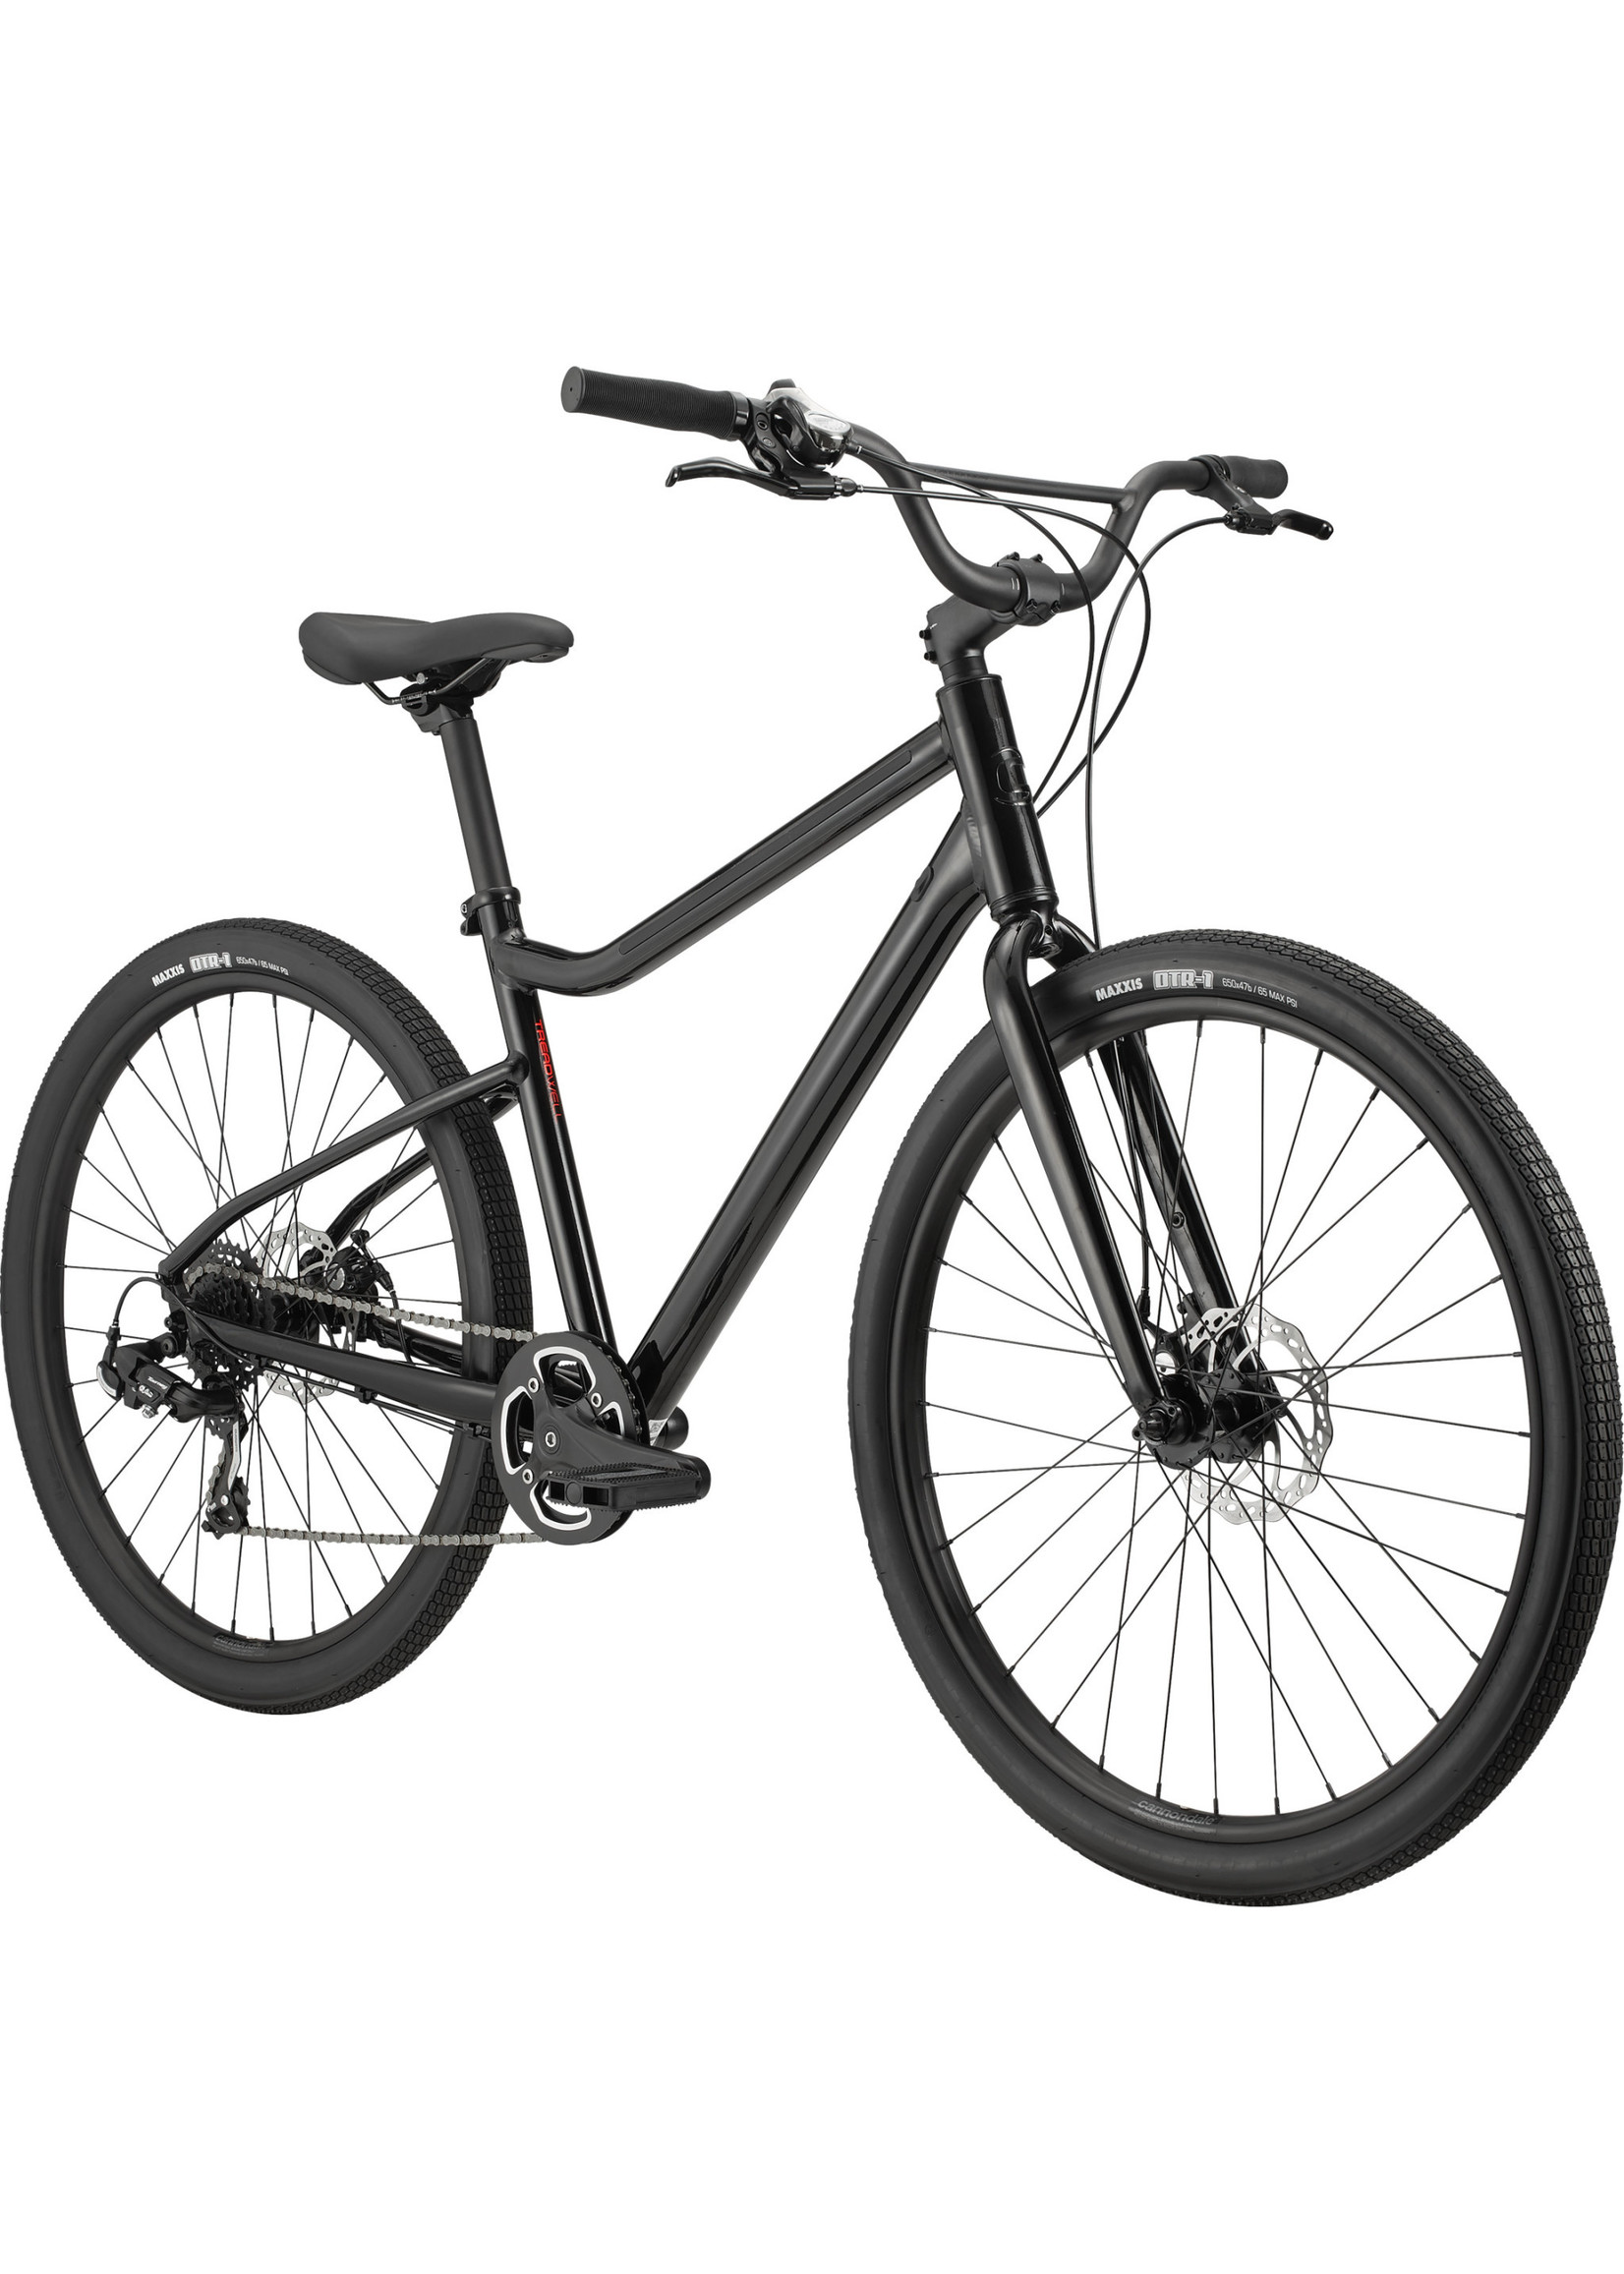 Cannondale Cannondale Treadwell 3, BLK LG - Black, Large